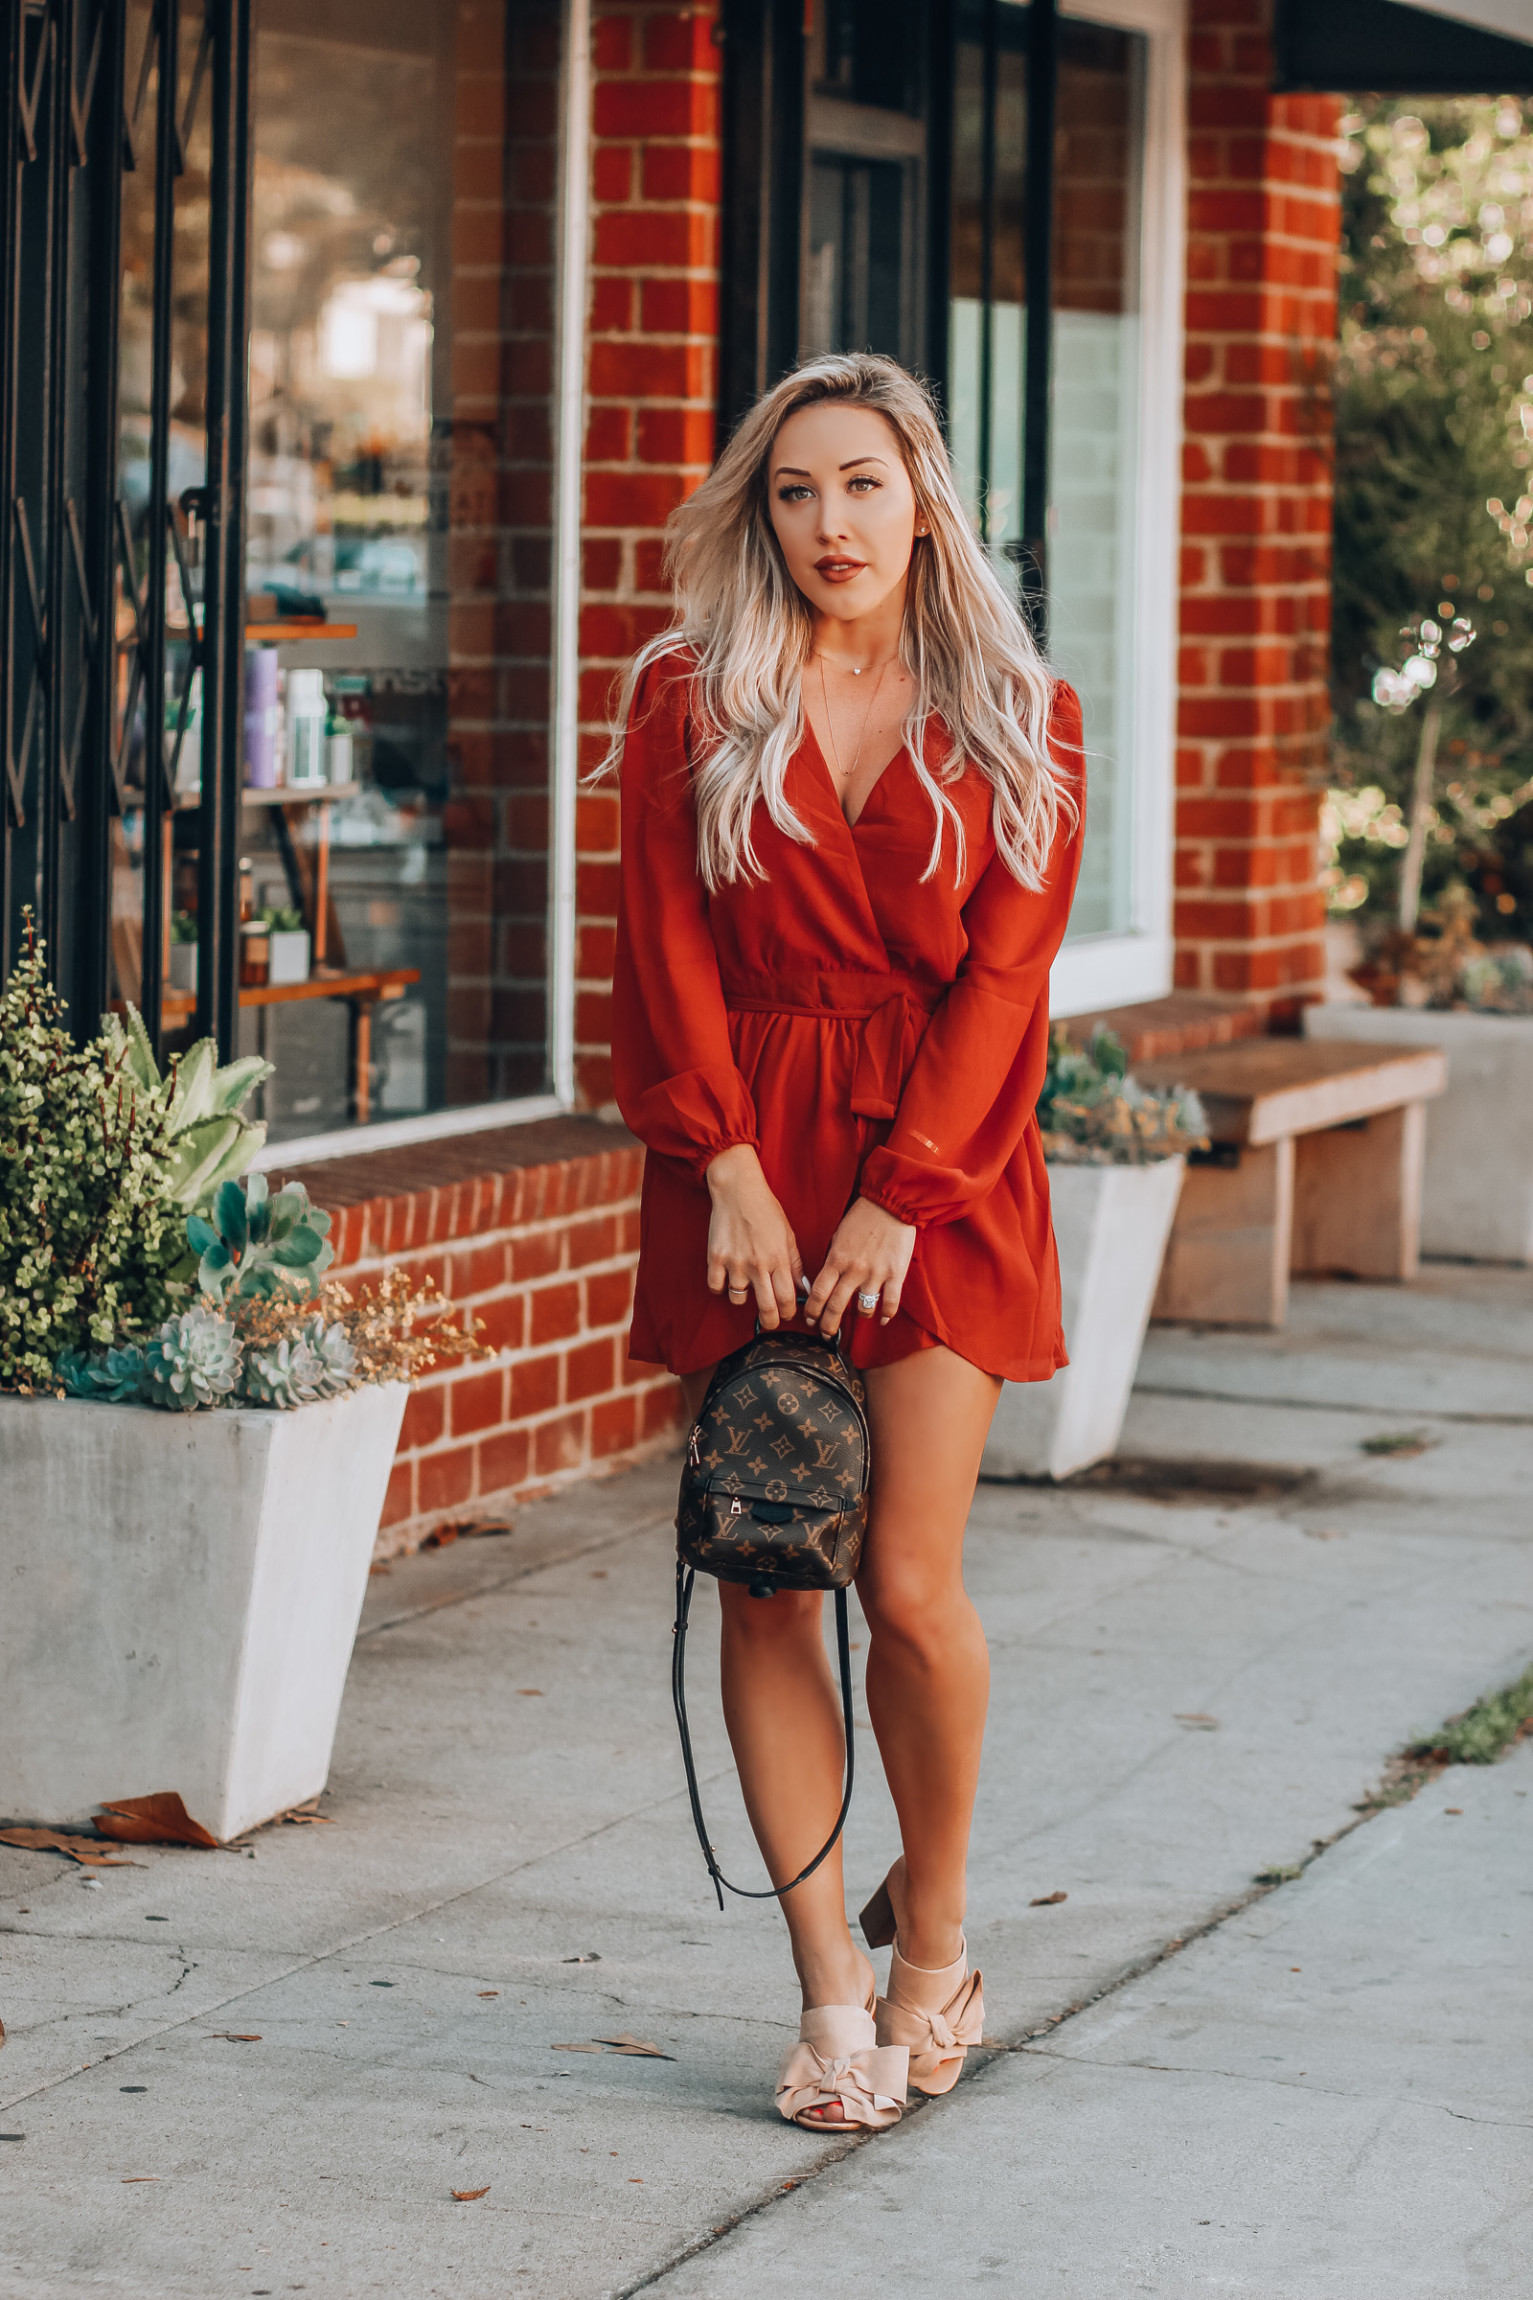 Flowy Chiffon Romper @FashionNova | Louis Vuitton Palm Springs Backpack Mini | Summer Style | Blondie in the City by Hayley Larue